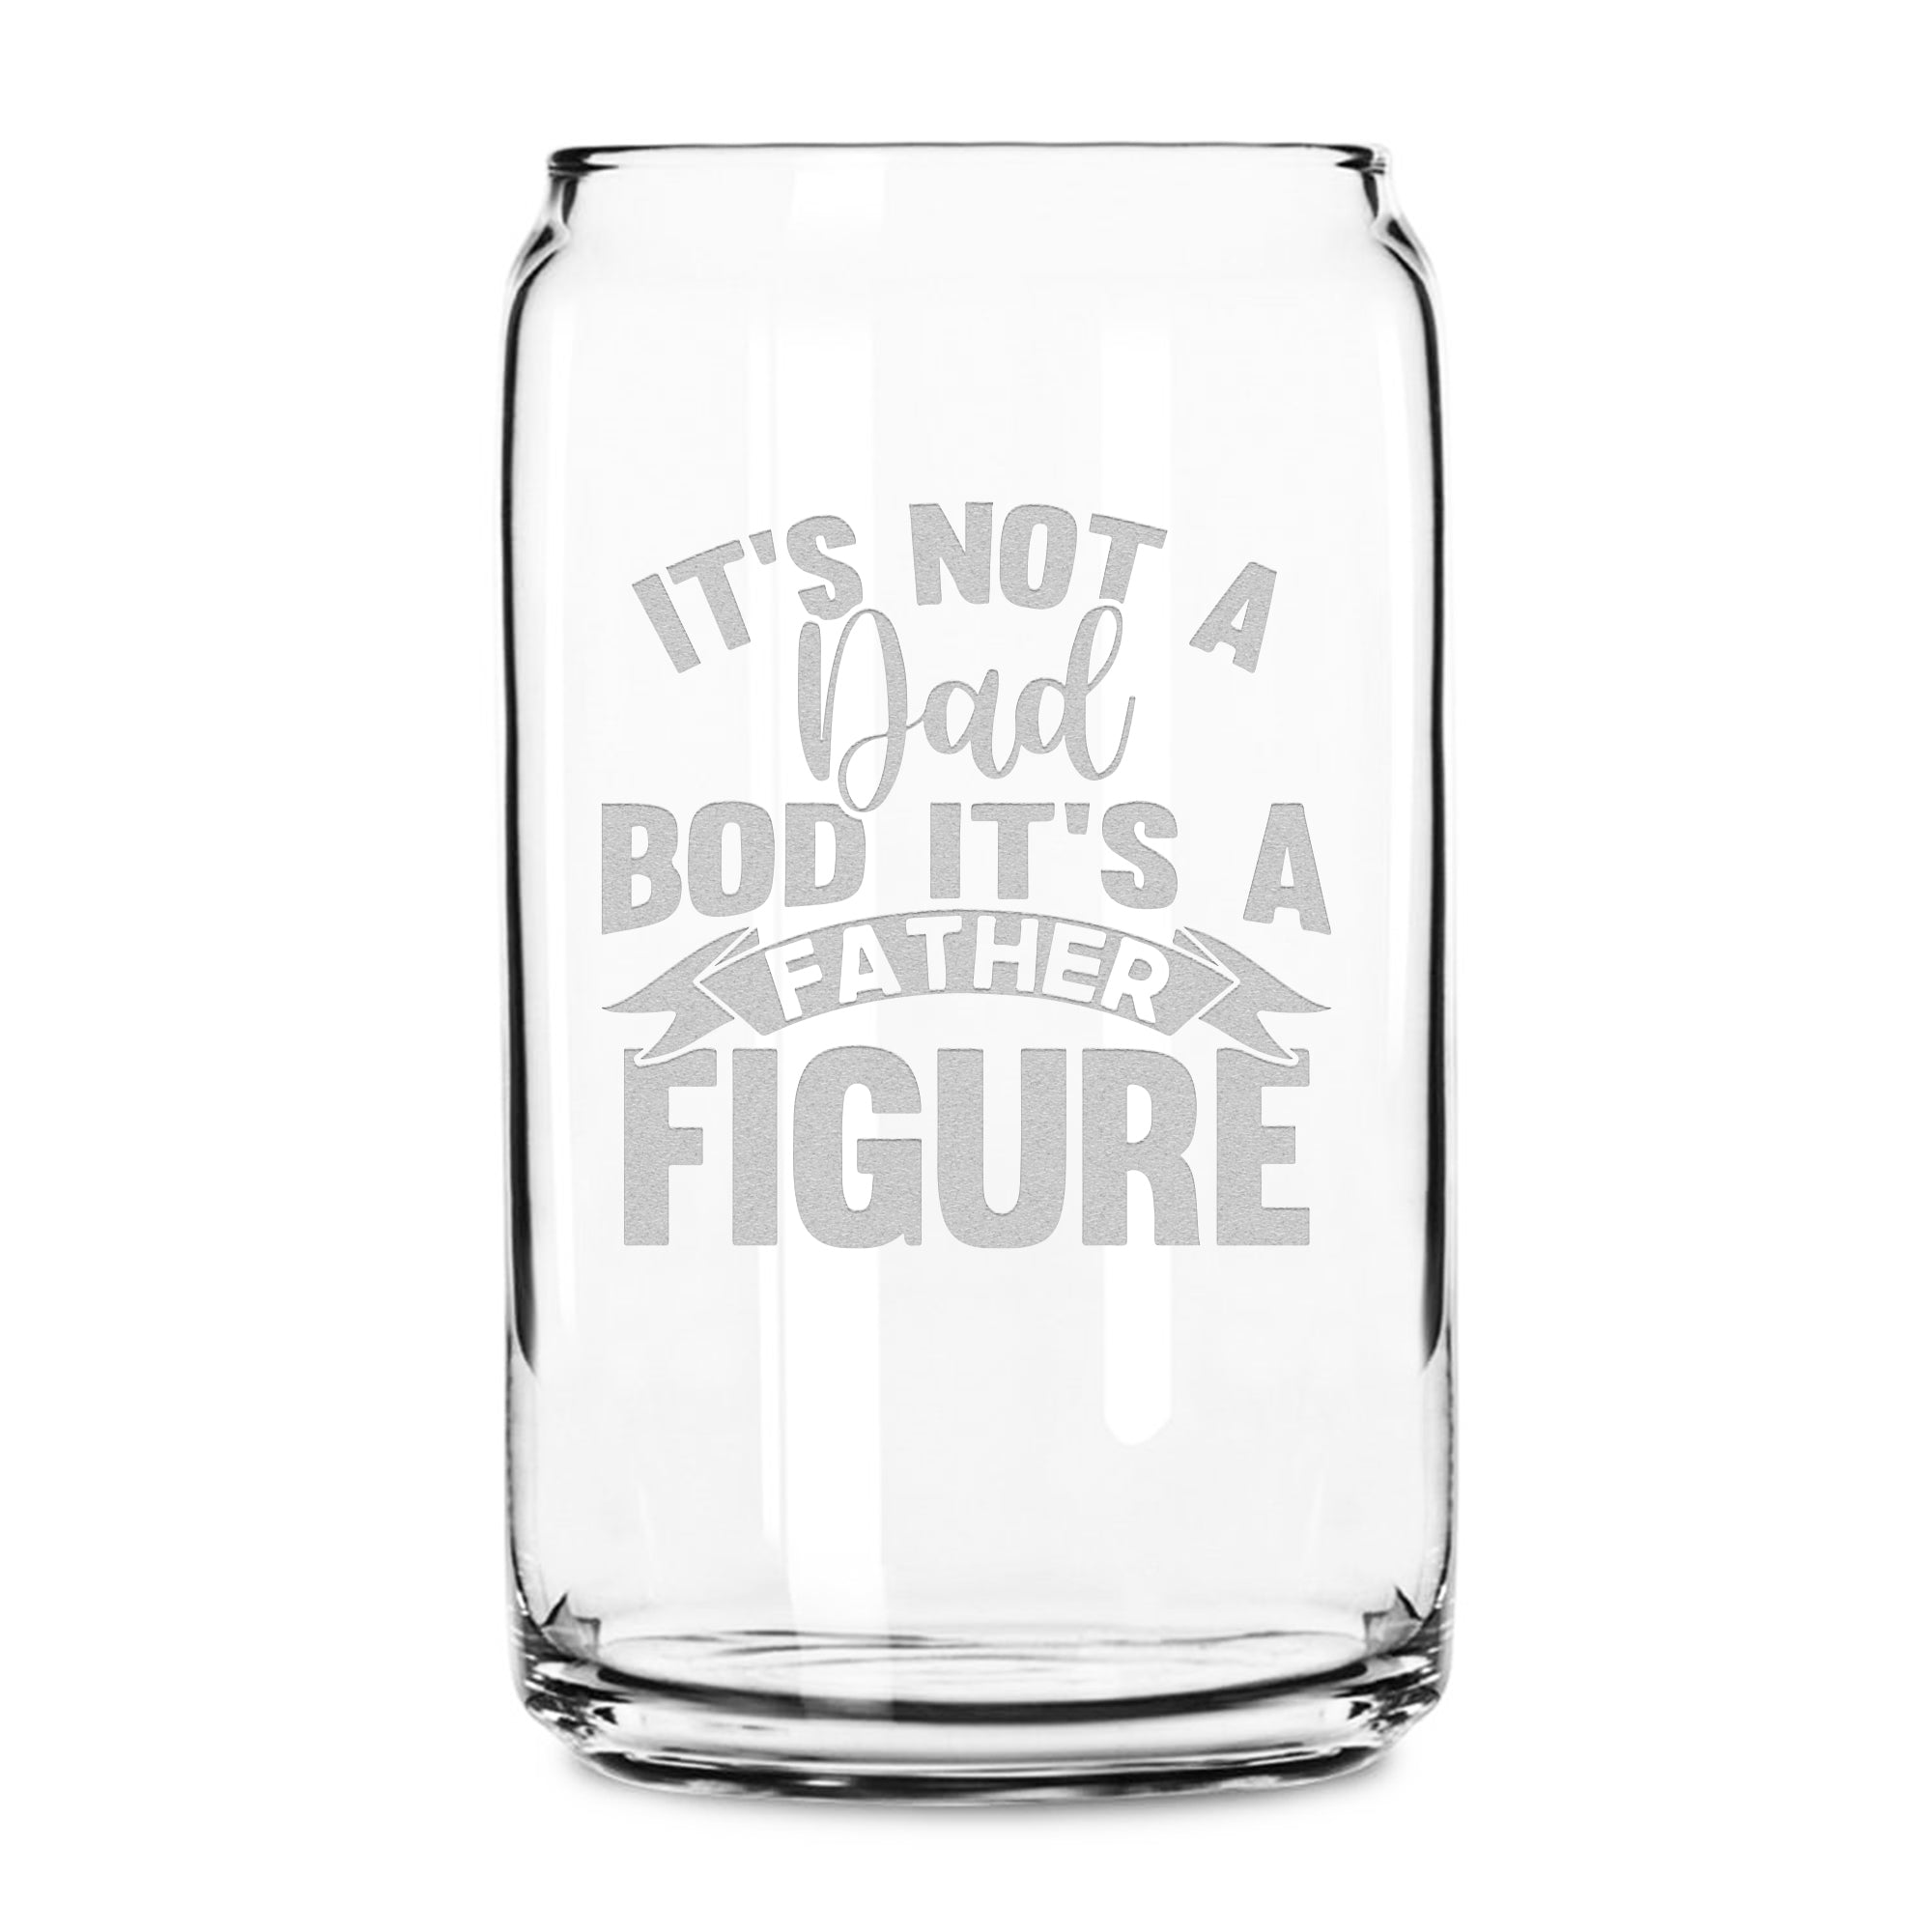 Integrity Bottles, Father Figure, Premium Beer Can Glass, Handmade, Handblown, Laser Etched or Hand Etched Gifts, Sand Carved, 16oz